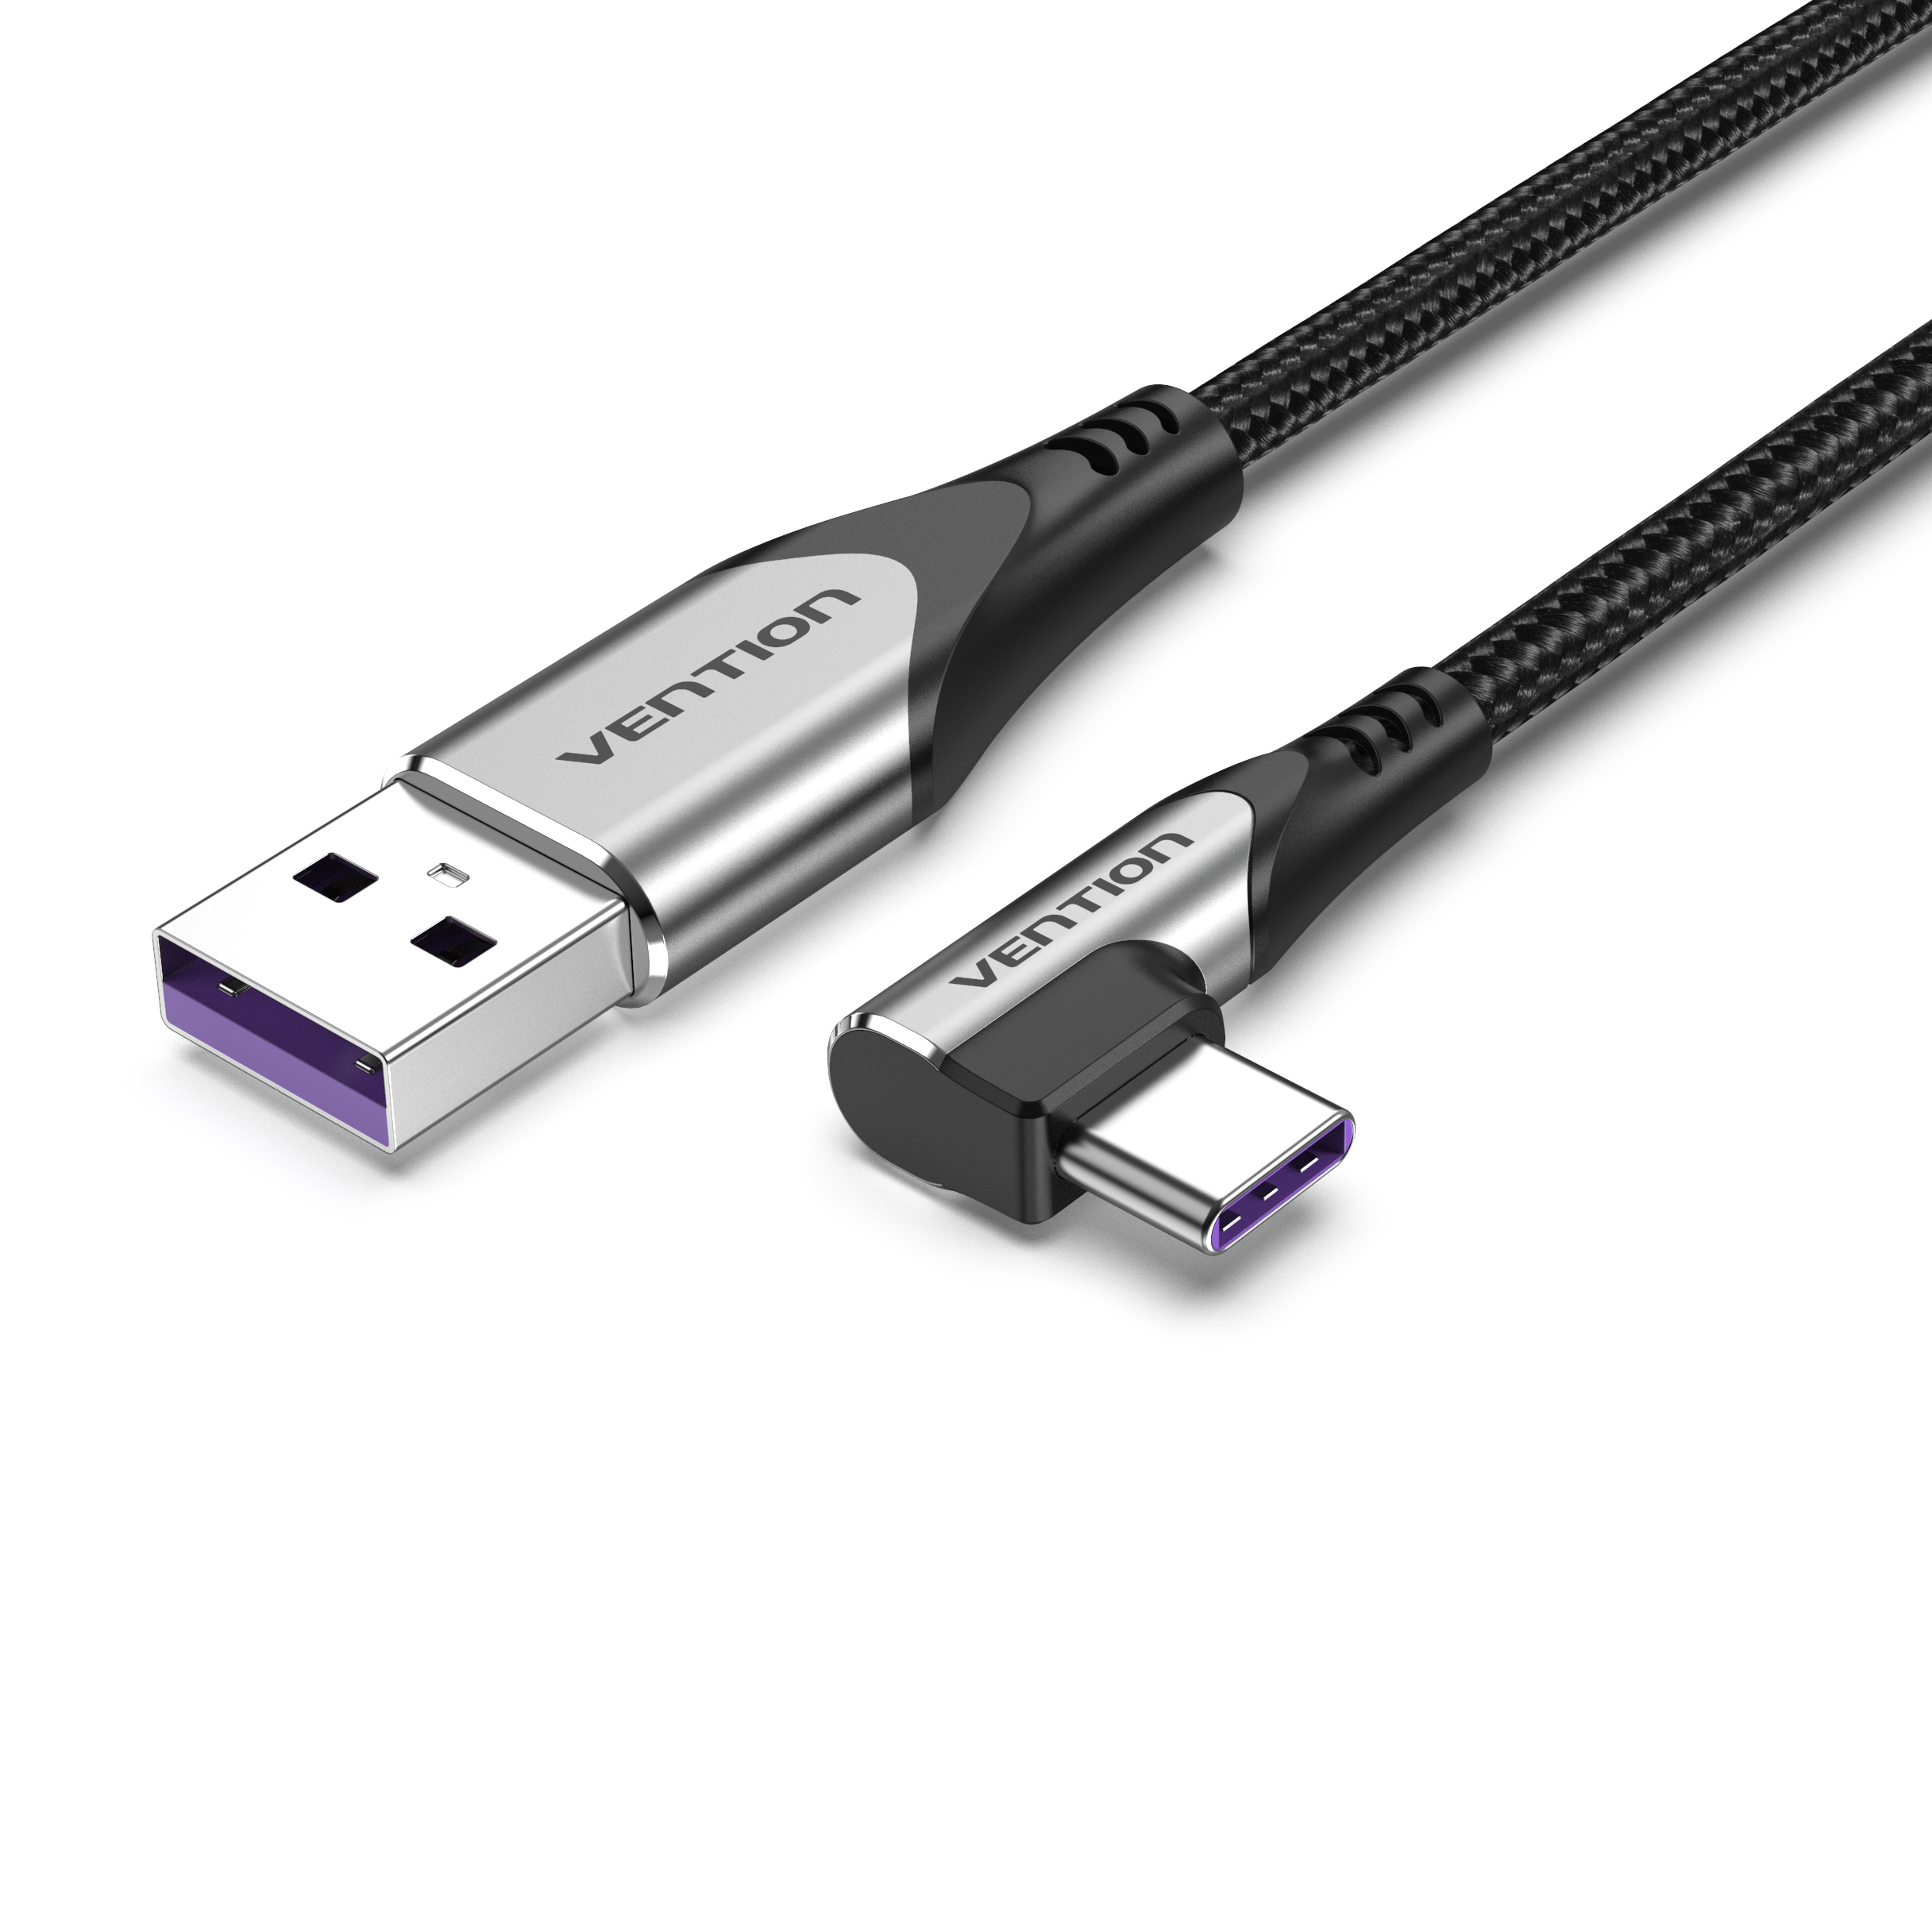 VENTION 速卖通 5A USB Type C Cable for Huawei Mate 30 P40 P30 Supercharge 40W Quick Charge 3.0 SCP Fast Charging Charger USB-C Cable